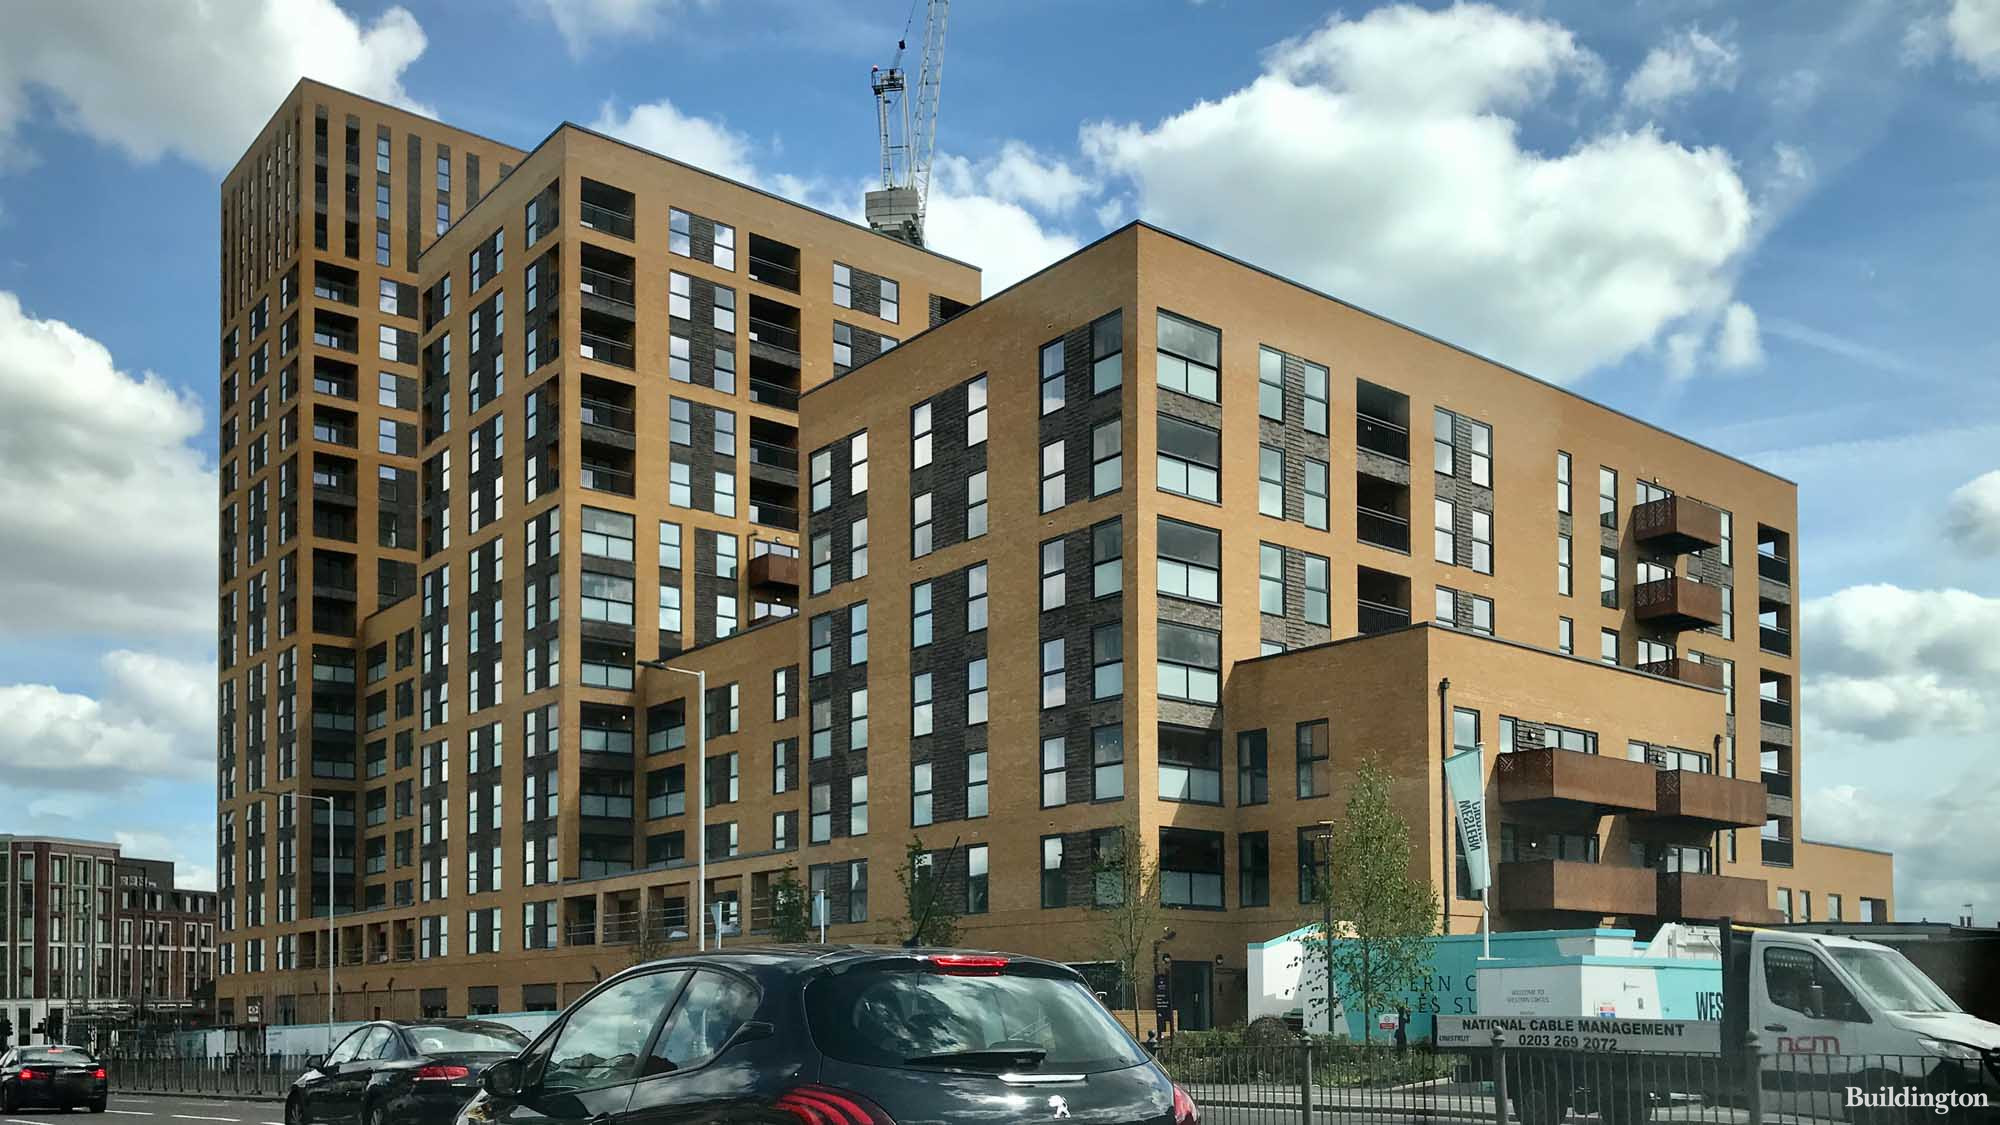 Western Circus new build homes from Barratt London in London W3.